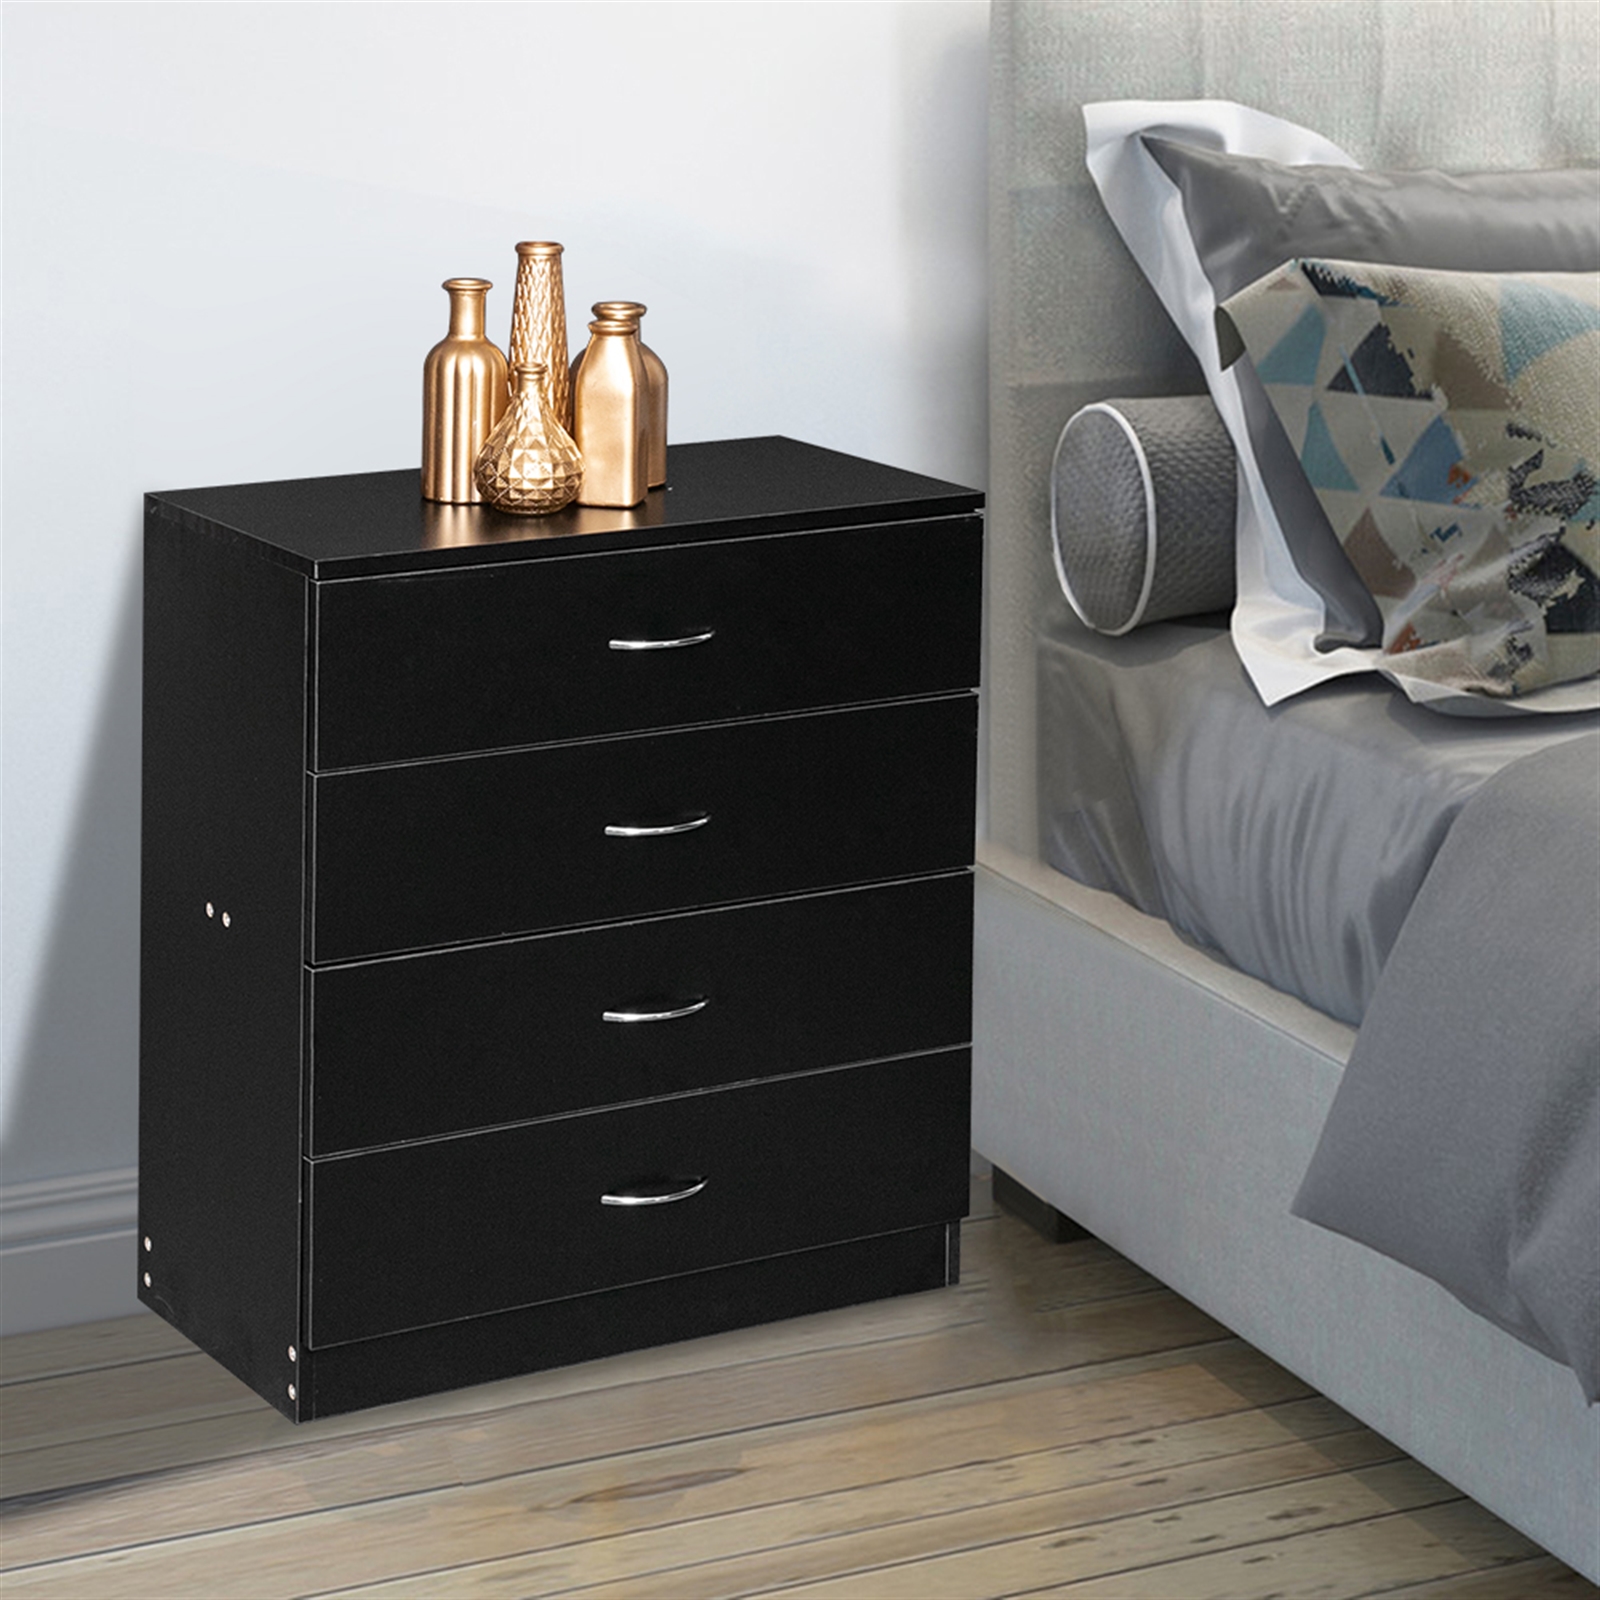 SYNGAR Modern Dresser Cabinet, Wooden 4-Drawer Dresser with Handles, Simple Home Storage Furniture of Drawers for Closet, Black Kids Storage Chest, Bedside Table of Bedroom for Clothes Cosmetic, D8780 - image 3 of 7